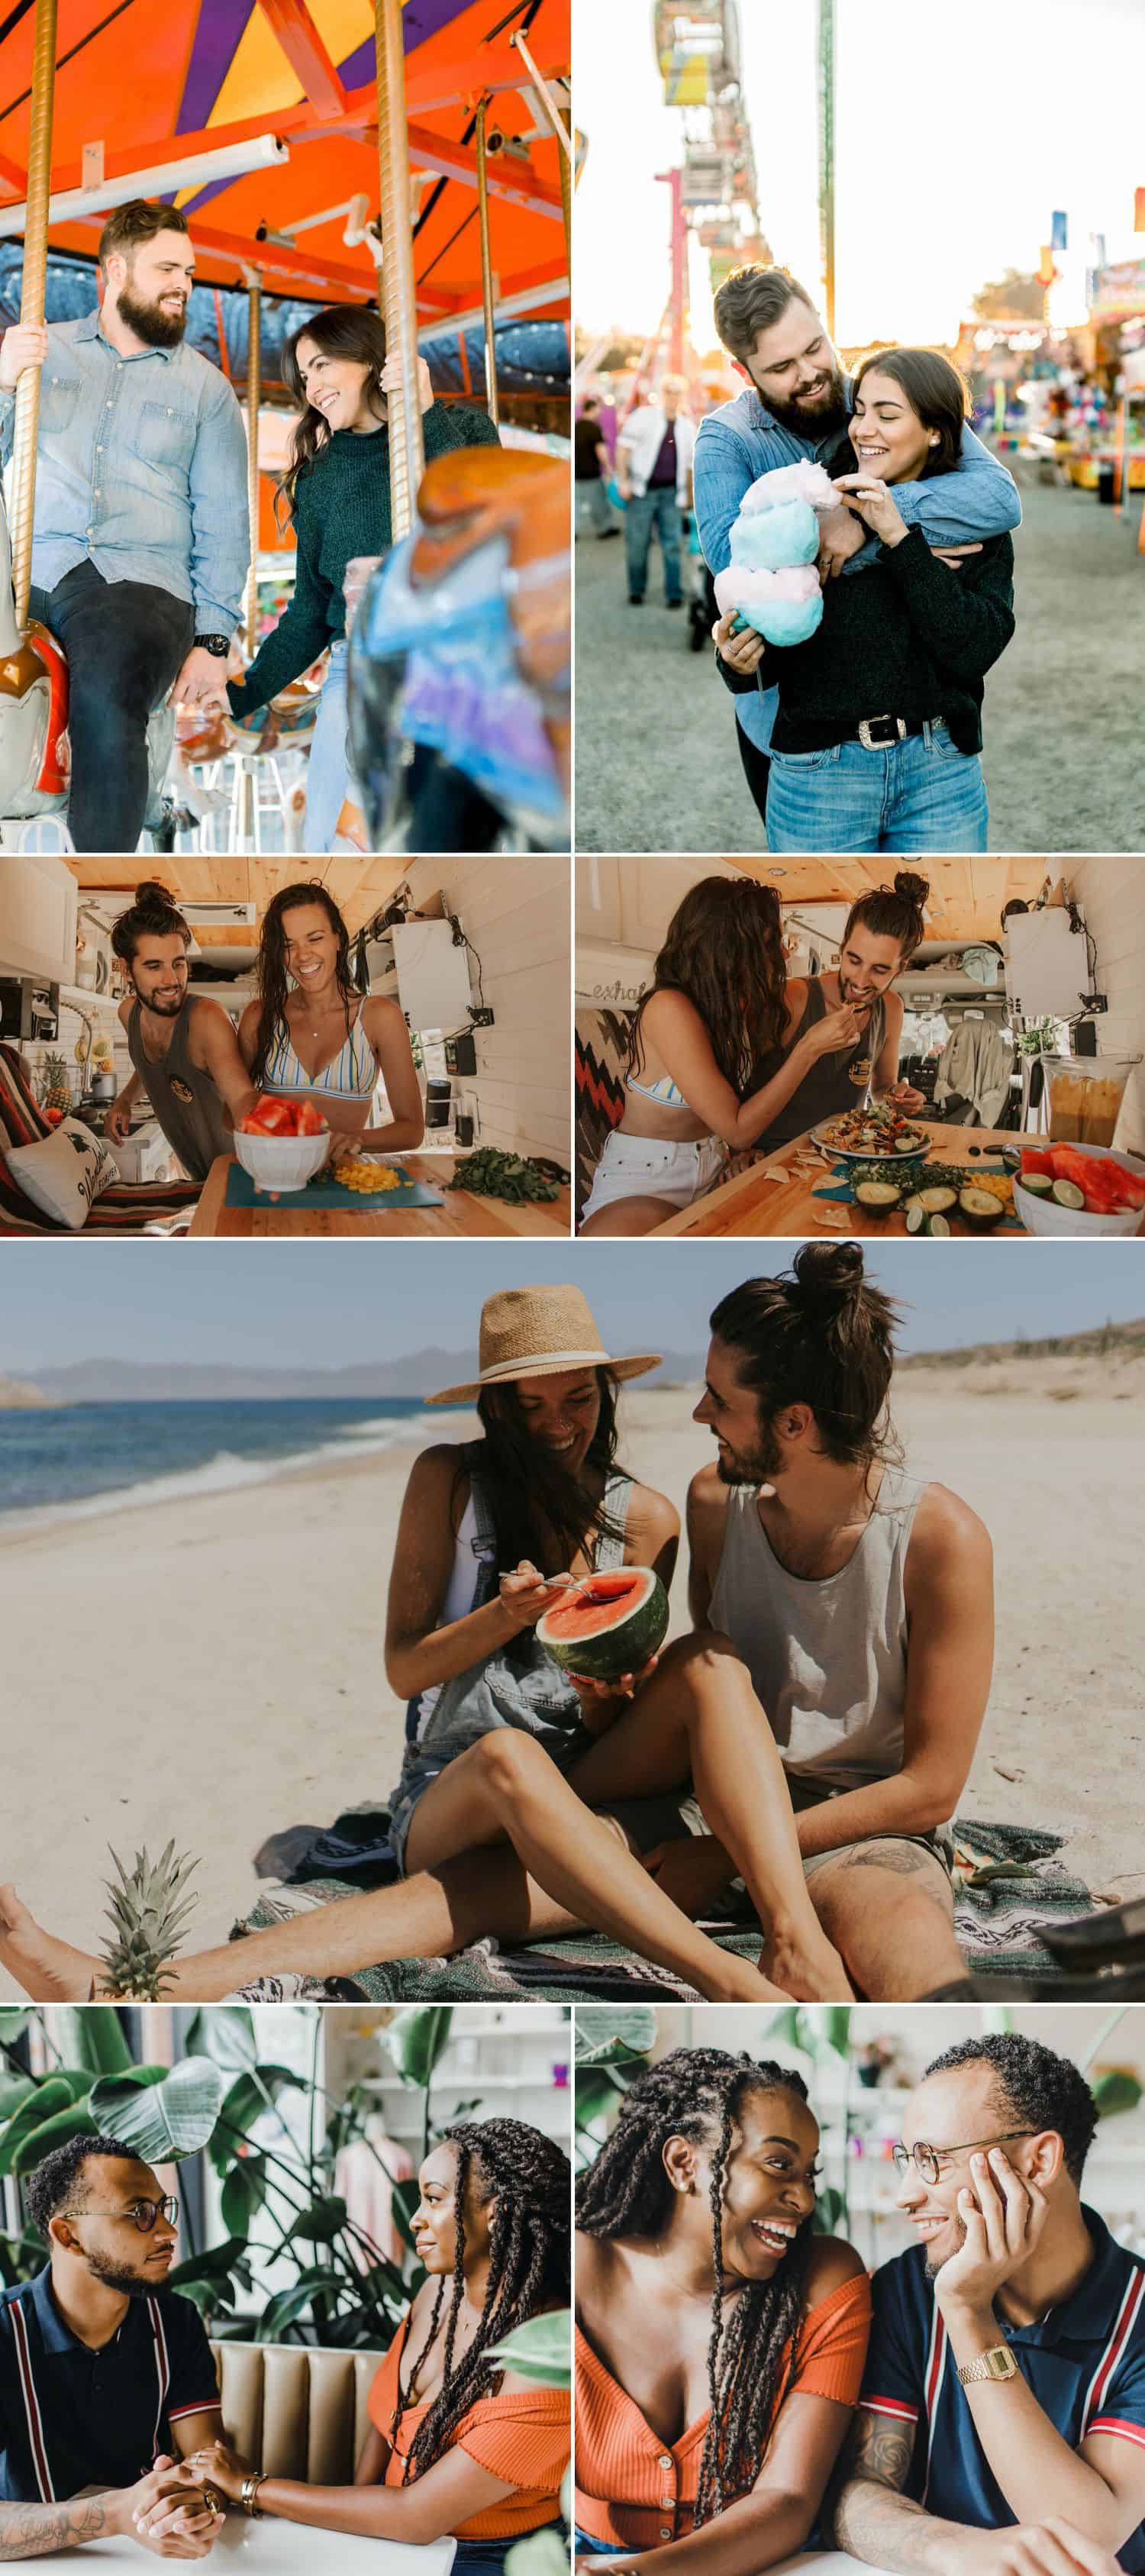 Cook a meal, go out for a snack, or enjoy a picnic during your engagement session